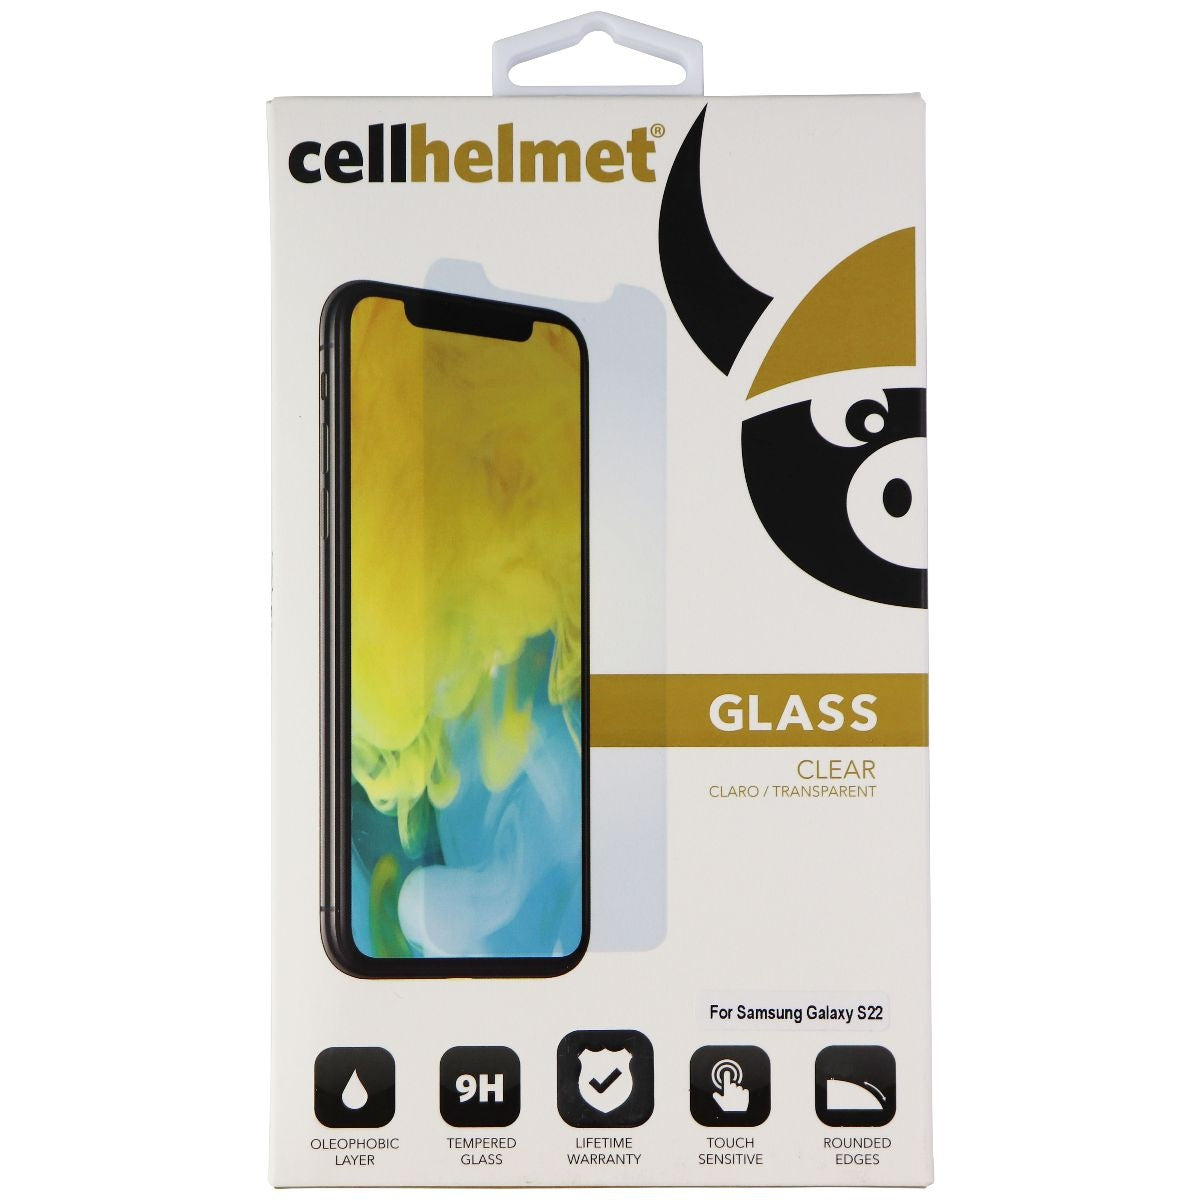 Cellhelmet Clear Glass Screen Protector for Samsung Galaxy S22 - Clear